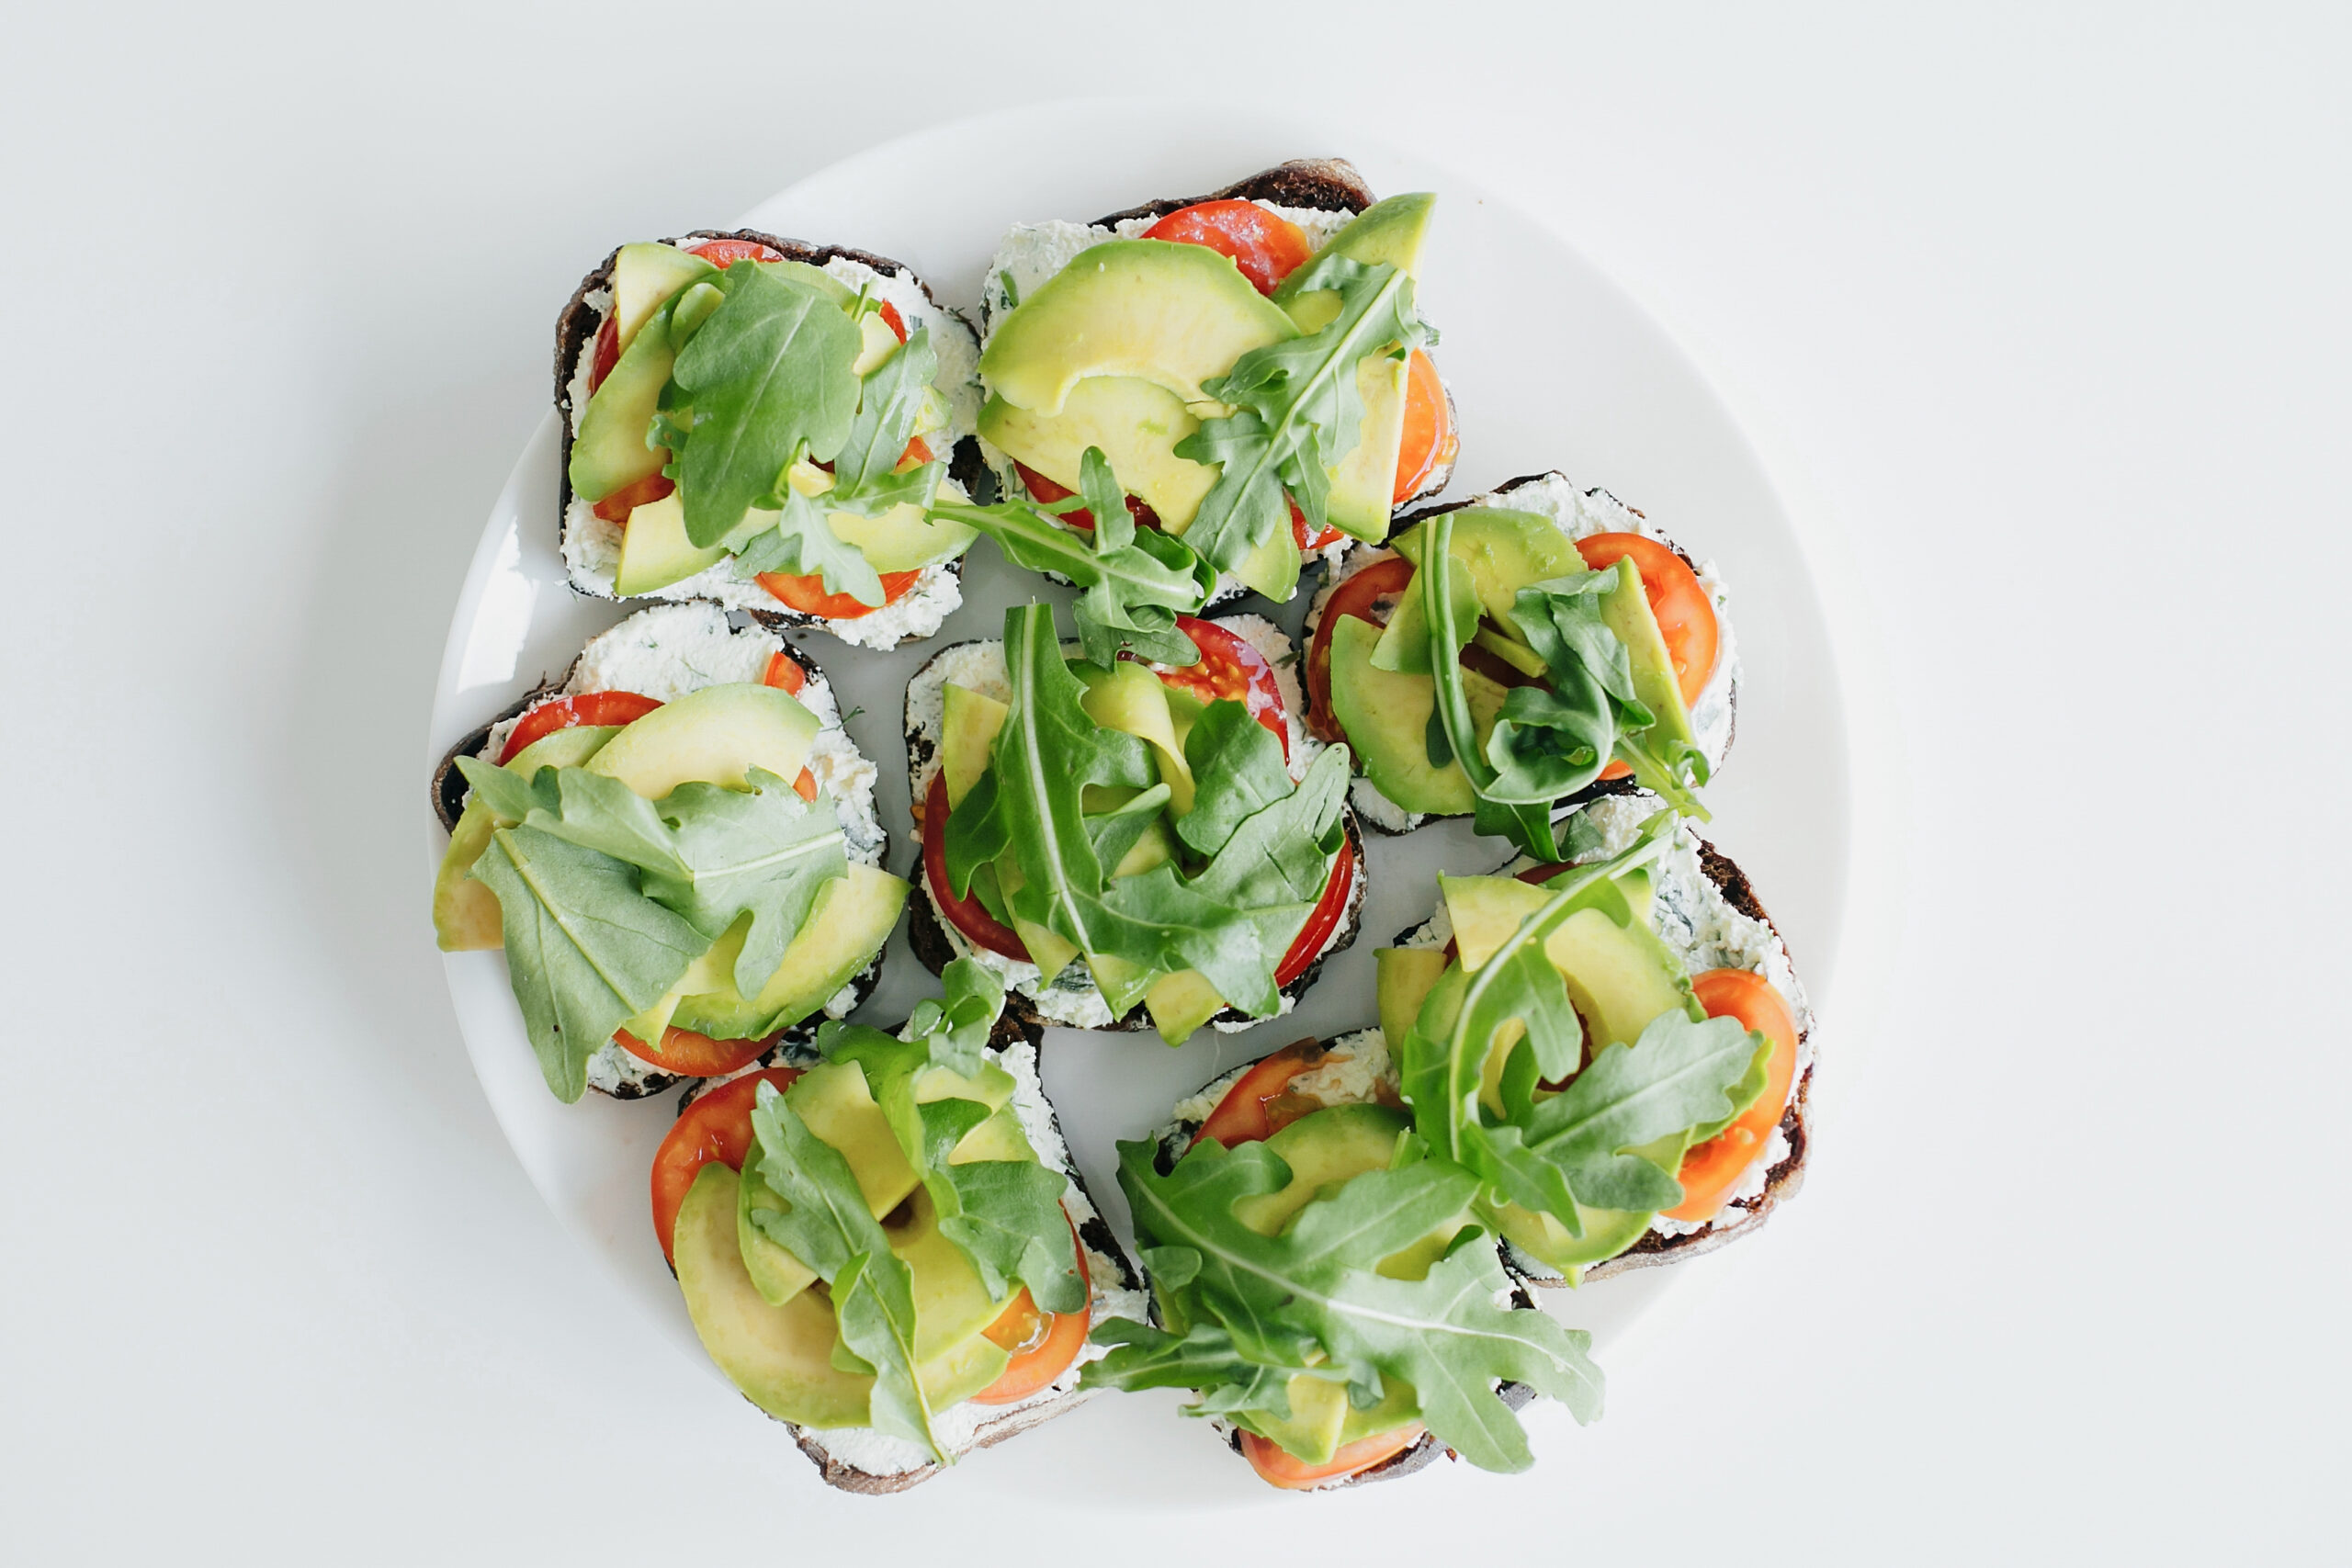 Rules of a Healthy Lifestyle: 7 Healthy Recipes for Toasts with Avocado Avocado,Toasts with Avocado